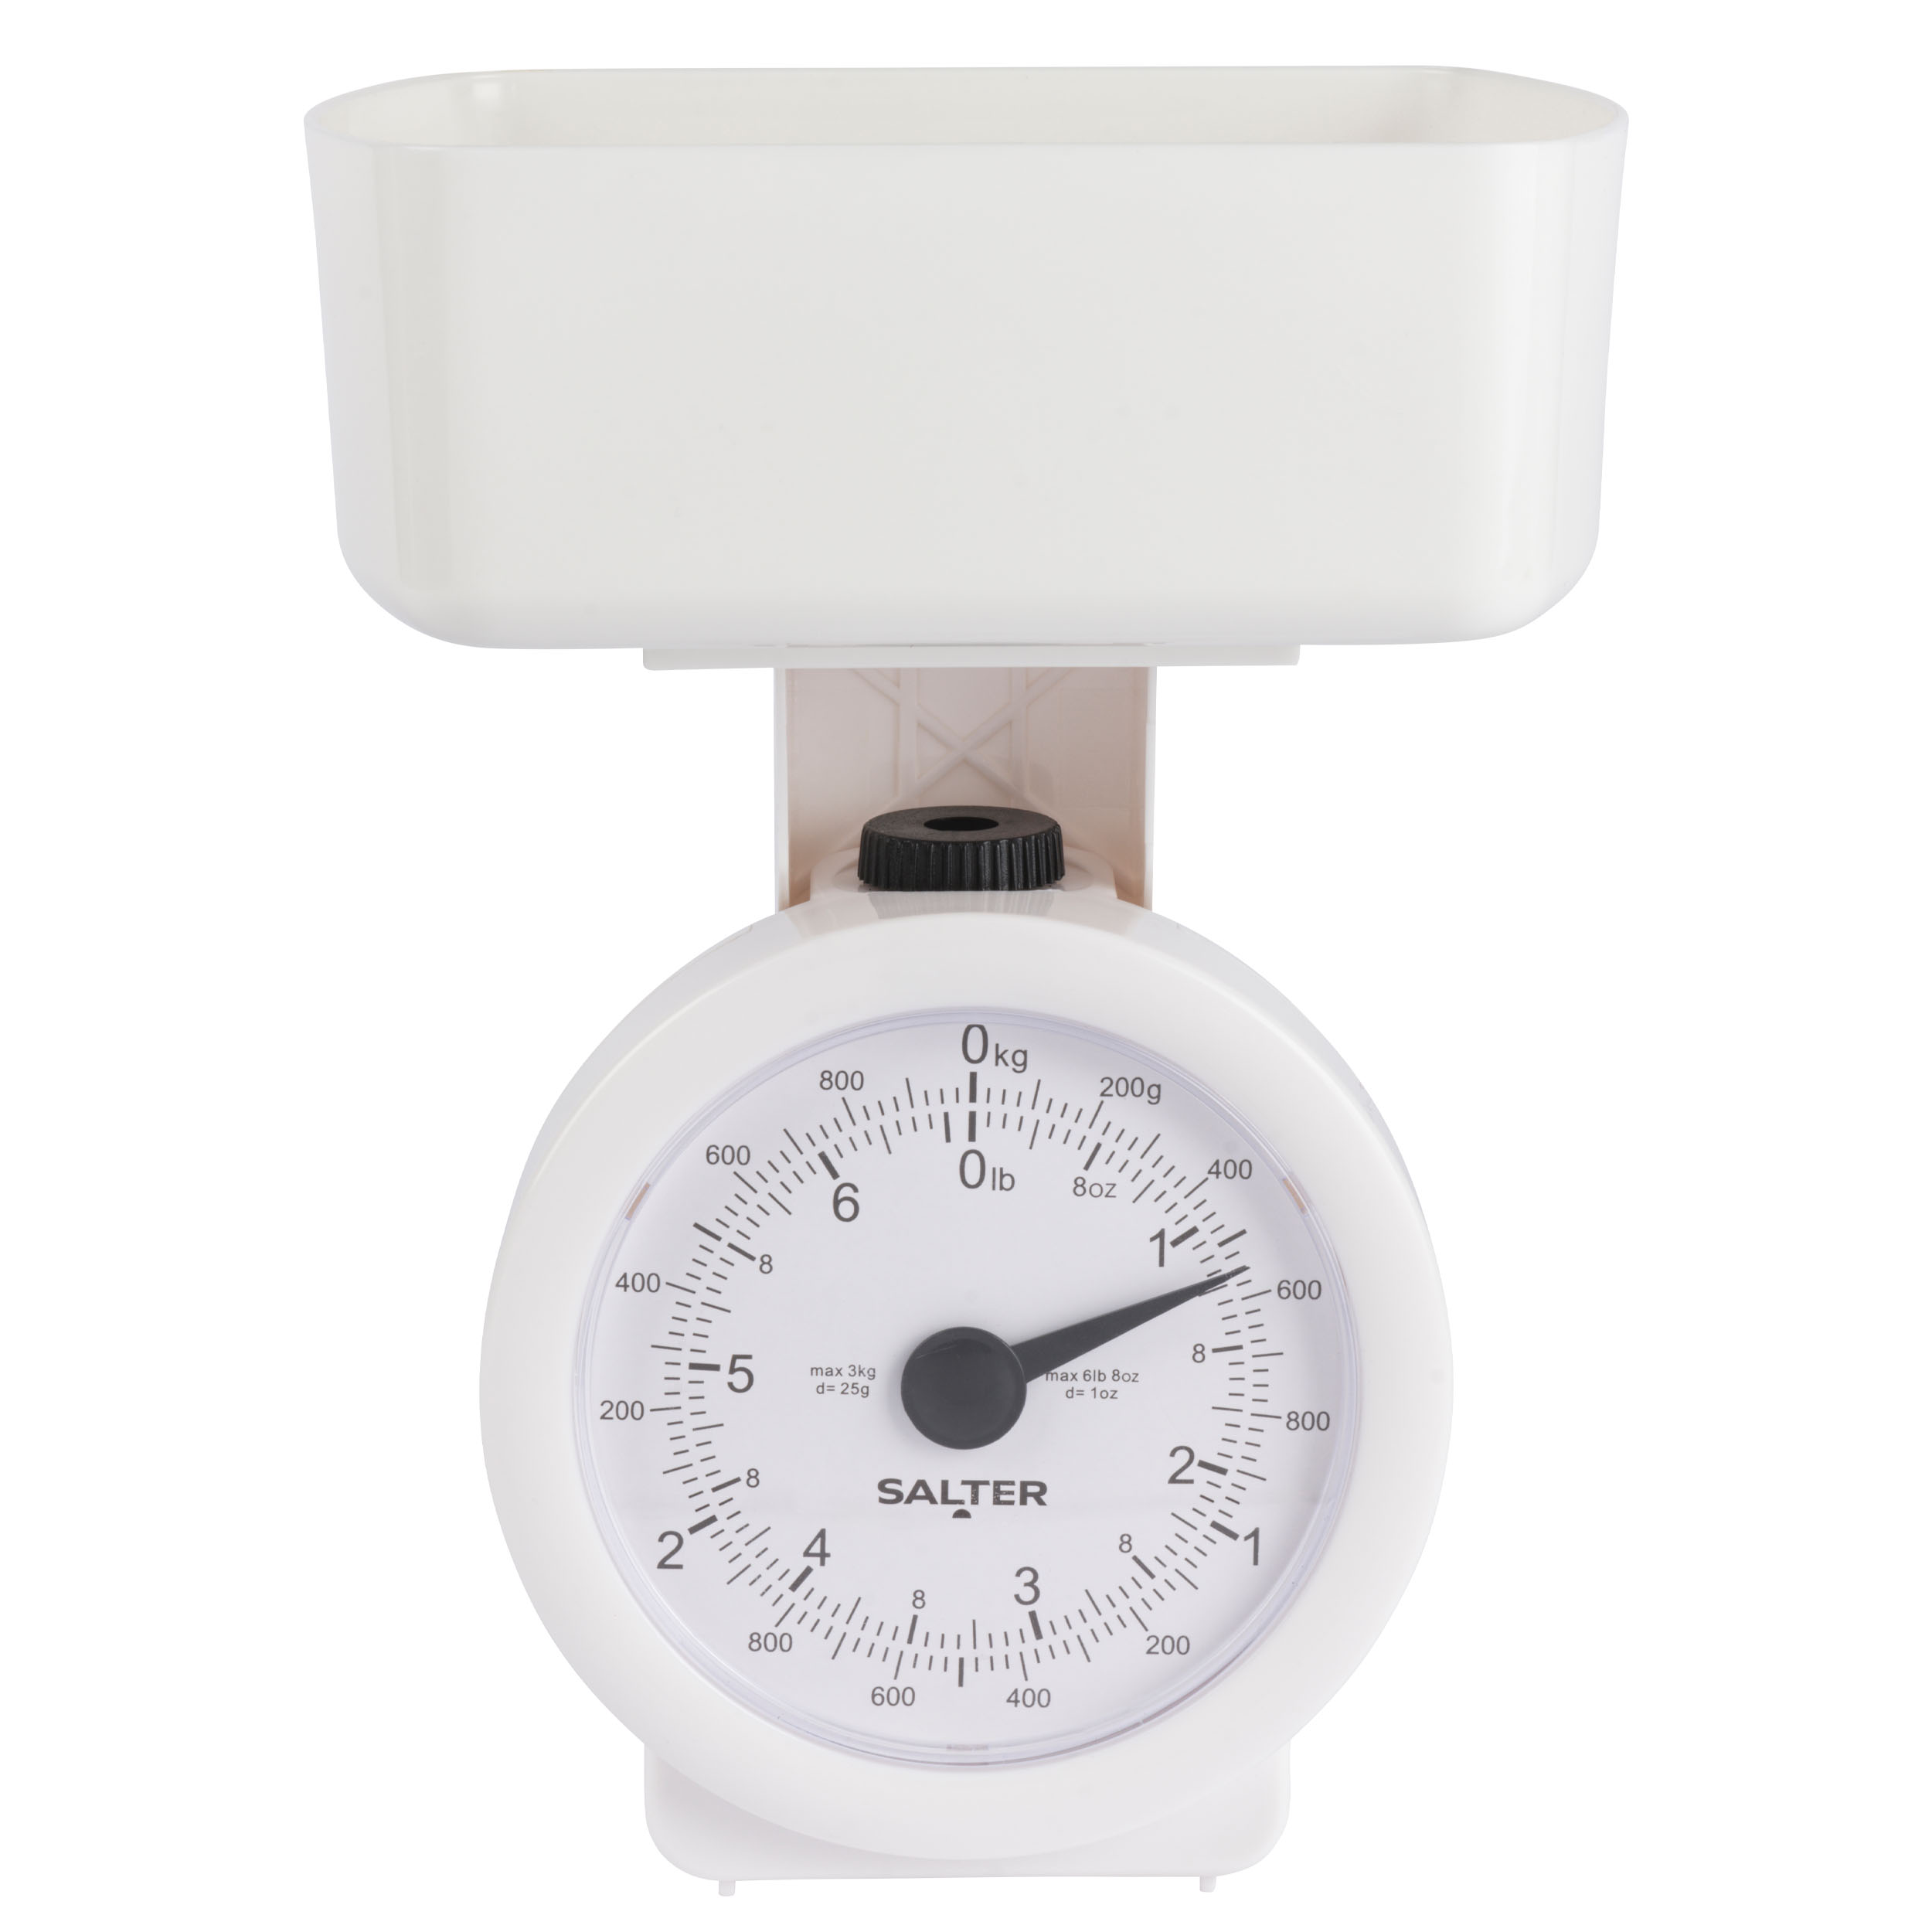 BARISTA-3KG Coffee/Kitchen Scale American Weigh Scales